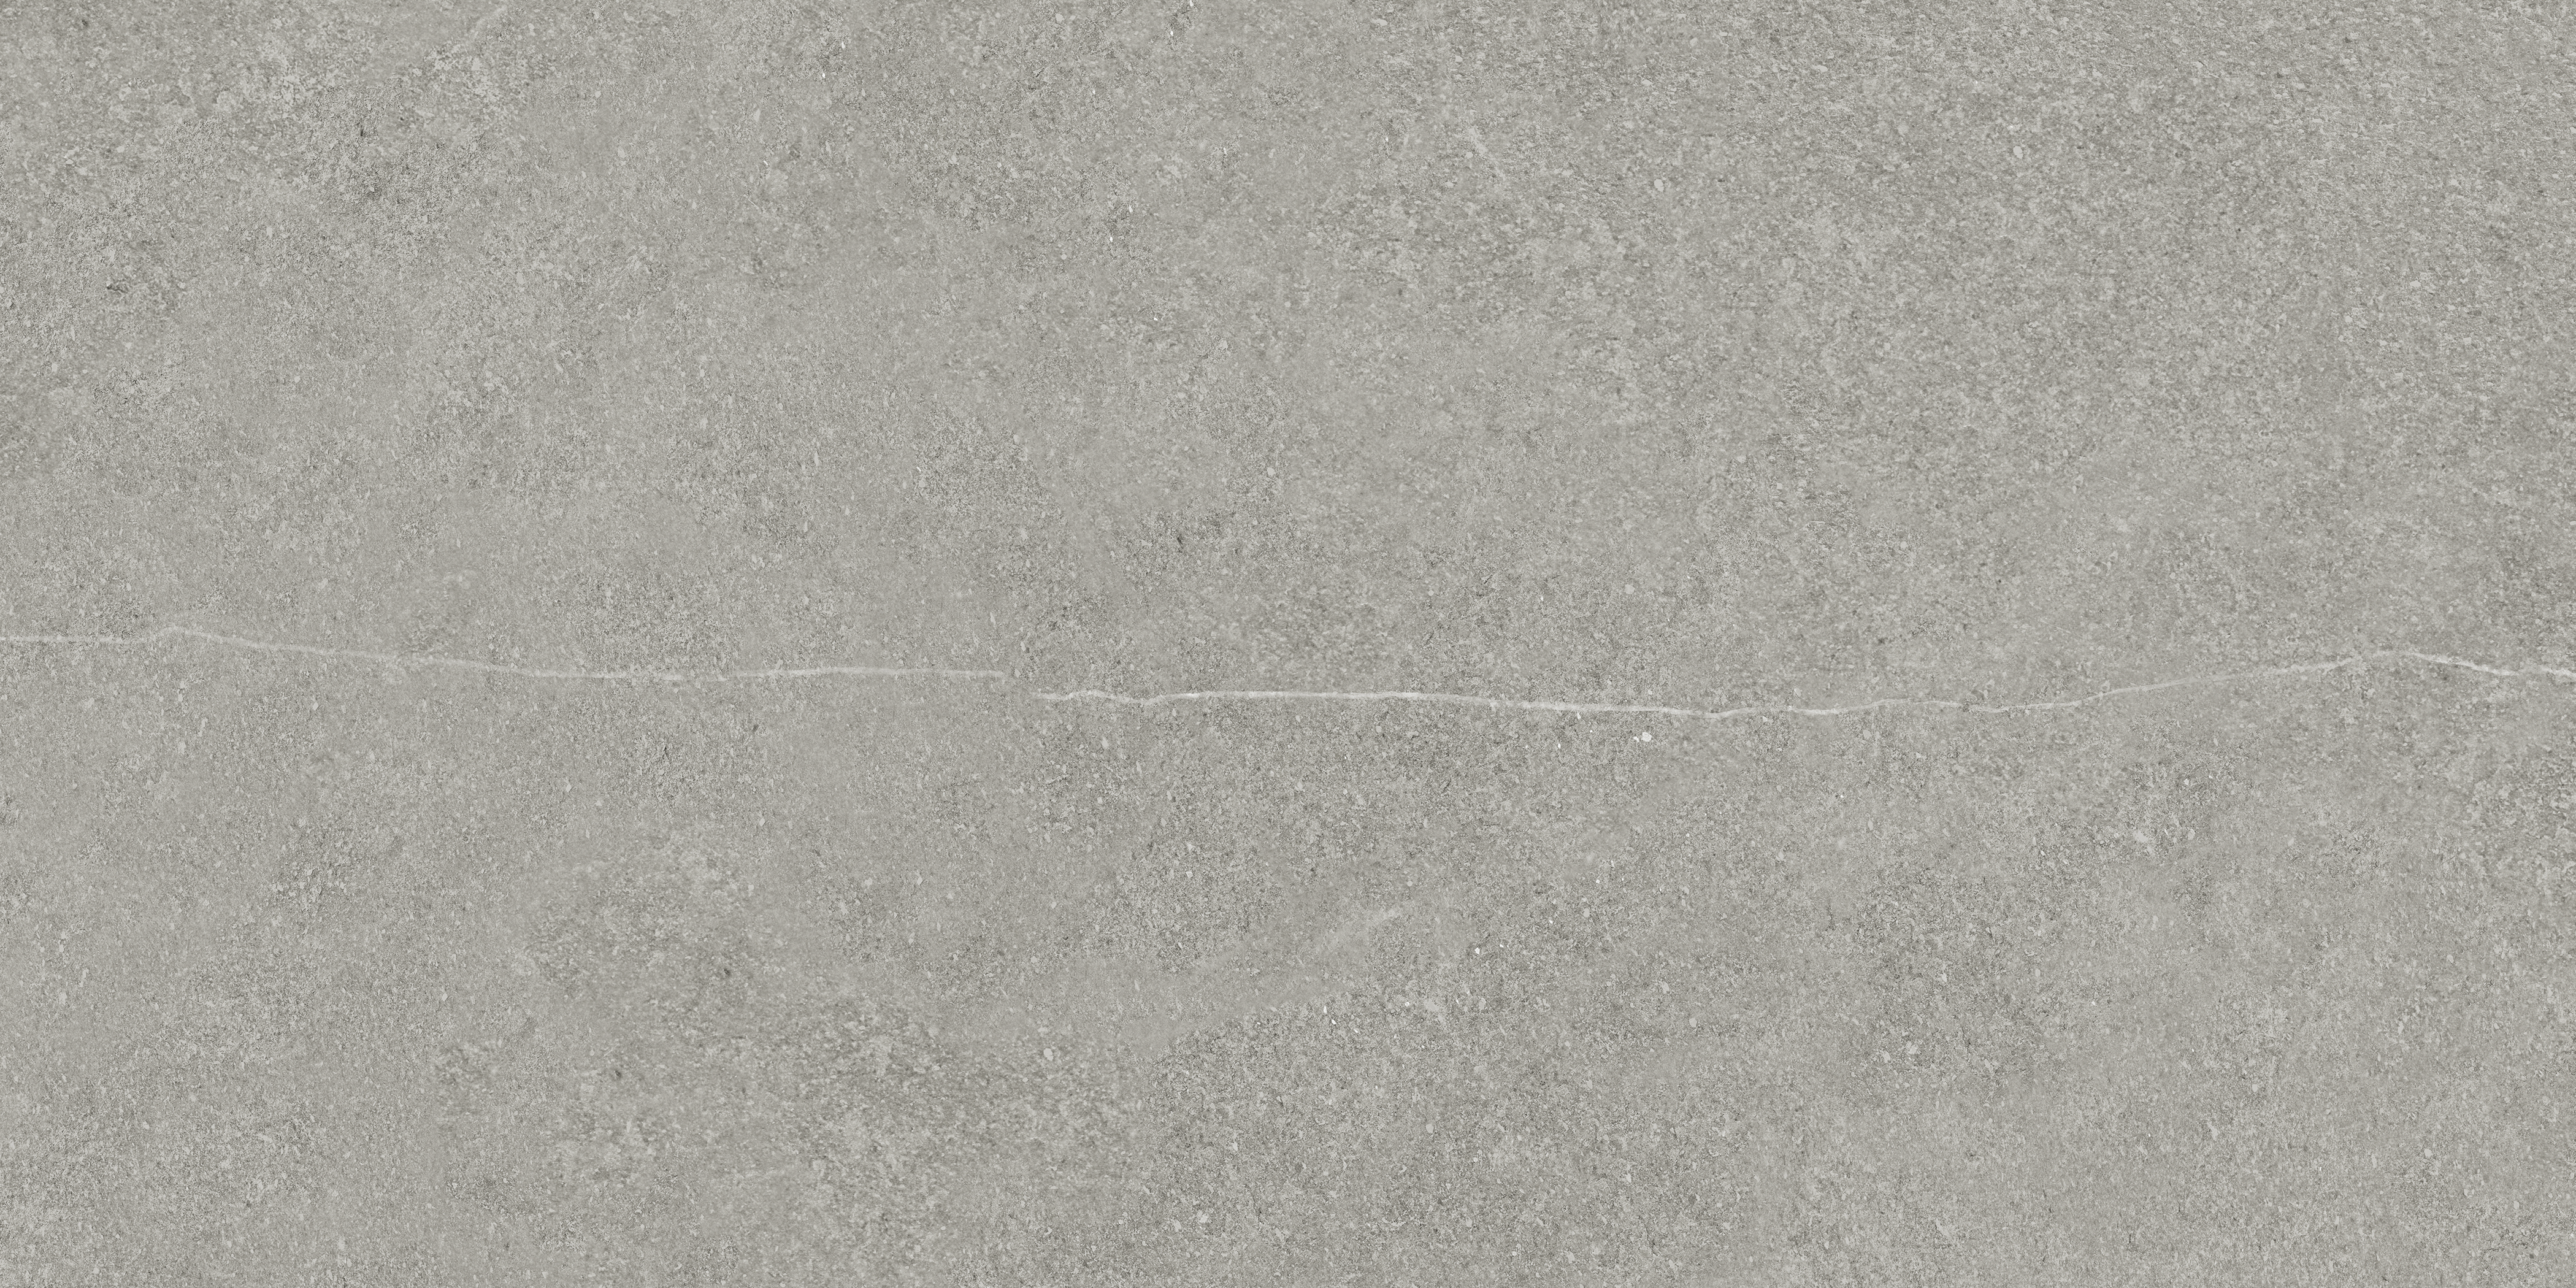 clay pattern color body porcelain field tile from mjork anatolia collection distributed by surface group international matte finish rectified edge 12x24 rectangle shape